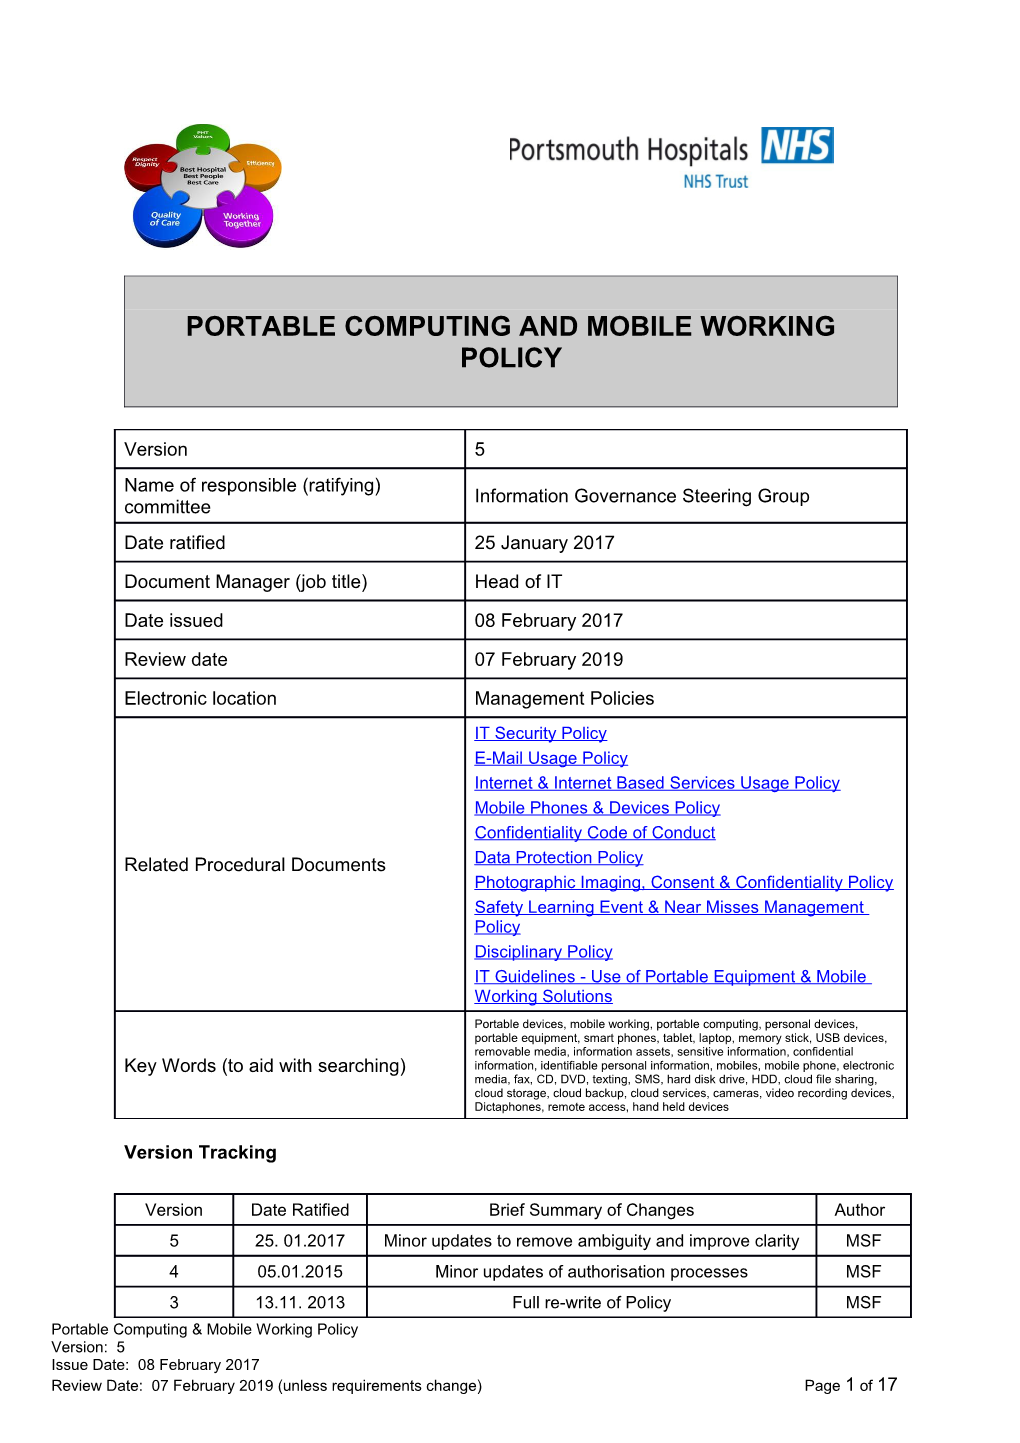 Portable Computing and Mobile Working Policy